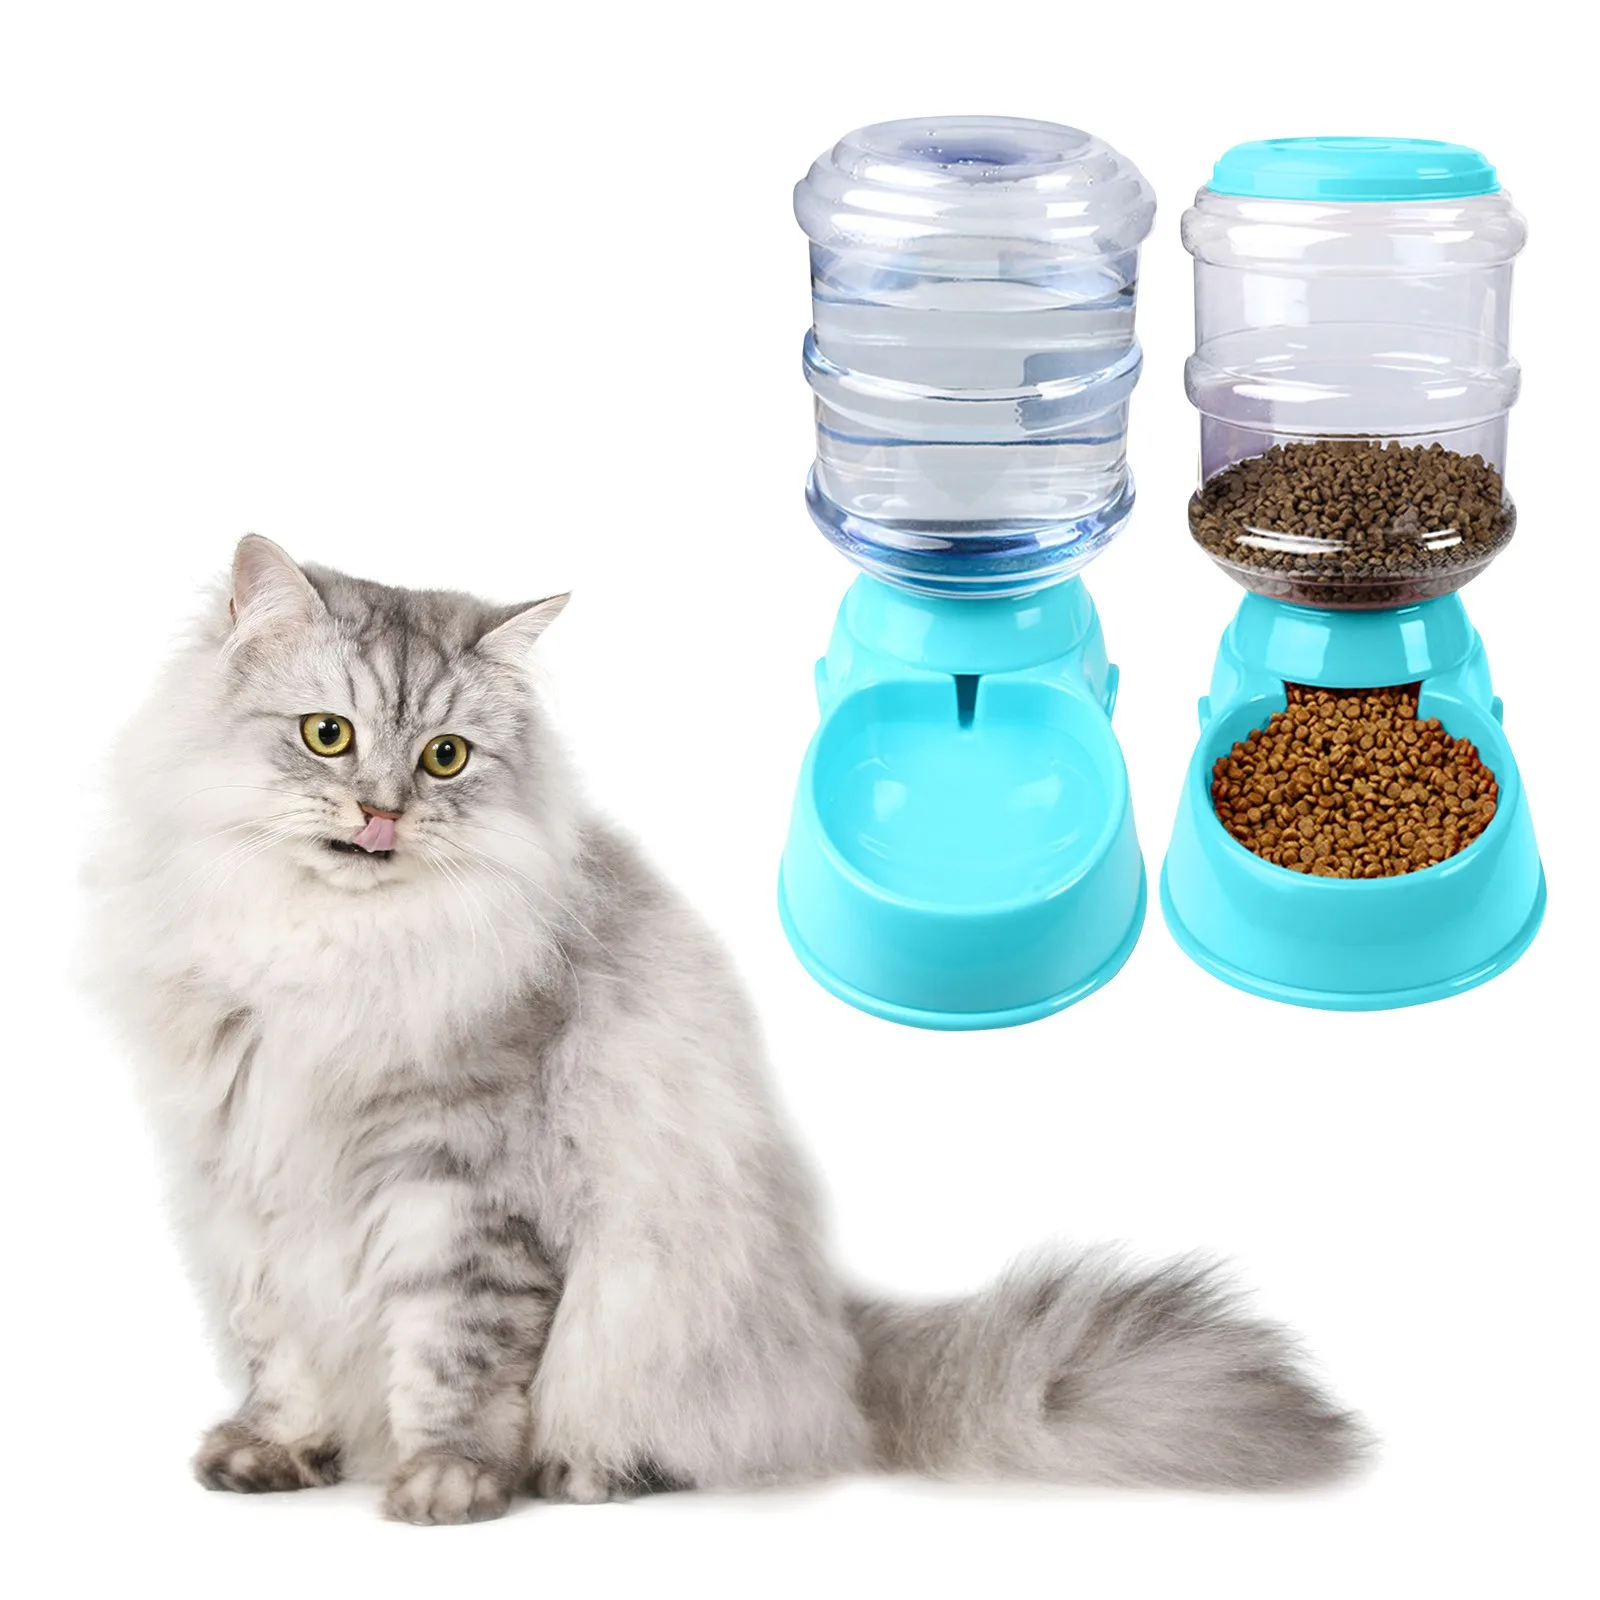 

2pc Automatic Self Dispensing Pet Feeder For Cats And Dogs 3.8l Capacity Dispenser Accessorie Pet Feeder For Dog Dry Food #30